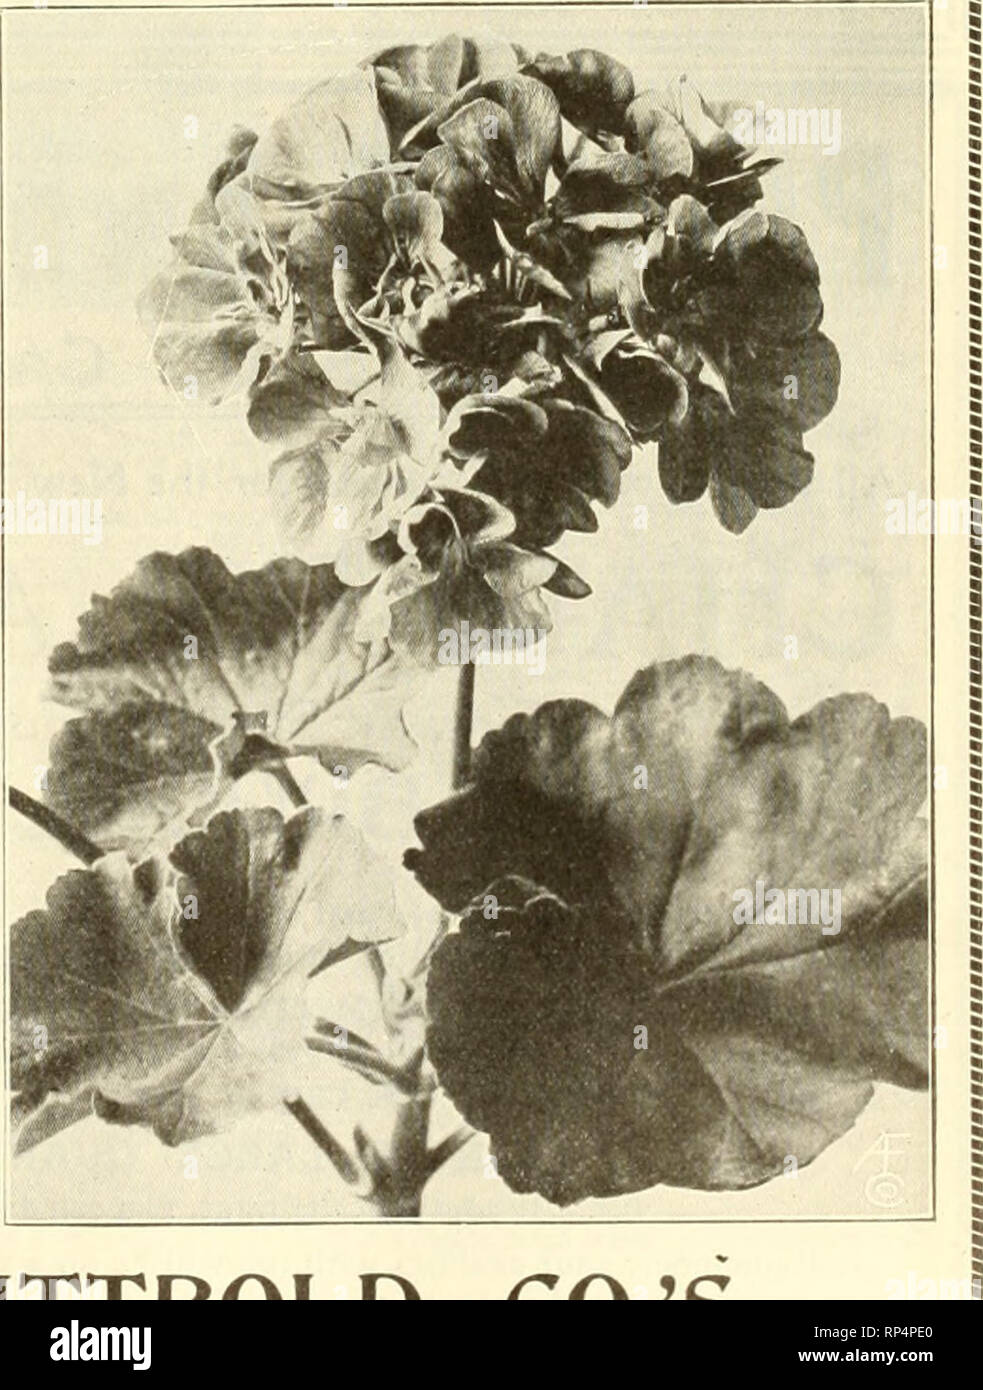 . The American florist : a weekly journal for the trade. Floriculture; Florists. TREES Each Moms Pendula (WeepinB MulbL-rry). 3 jr., heads 5 ft, high, stems IVi to IH in $1.25 Cherry, Early Richmond and Dyebrus, 1 to m in, stem 6 to 8 ft 50 Acer Negundo (Box Elder), 2 to 2V2 in. stems. 8 to 10 (t 1 00 Salix Americana (American Weeping Willow), m to IH in, stems 7 to 8 ft., nice heads.. 1 25 DUmus Montana Pendula (Camperdown Weeping Elm). 2H to 3 in. stems. 10 to 12 ft., 3 Populus Monilifera (Carolina Poplar), 2 to2ti in 75 SHRUBS Weeping Mulberry. Comus Siberica (Dogwood). 3H to 4 ft. bashy Sp Stock Photo